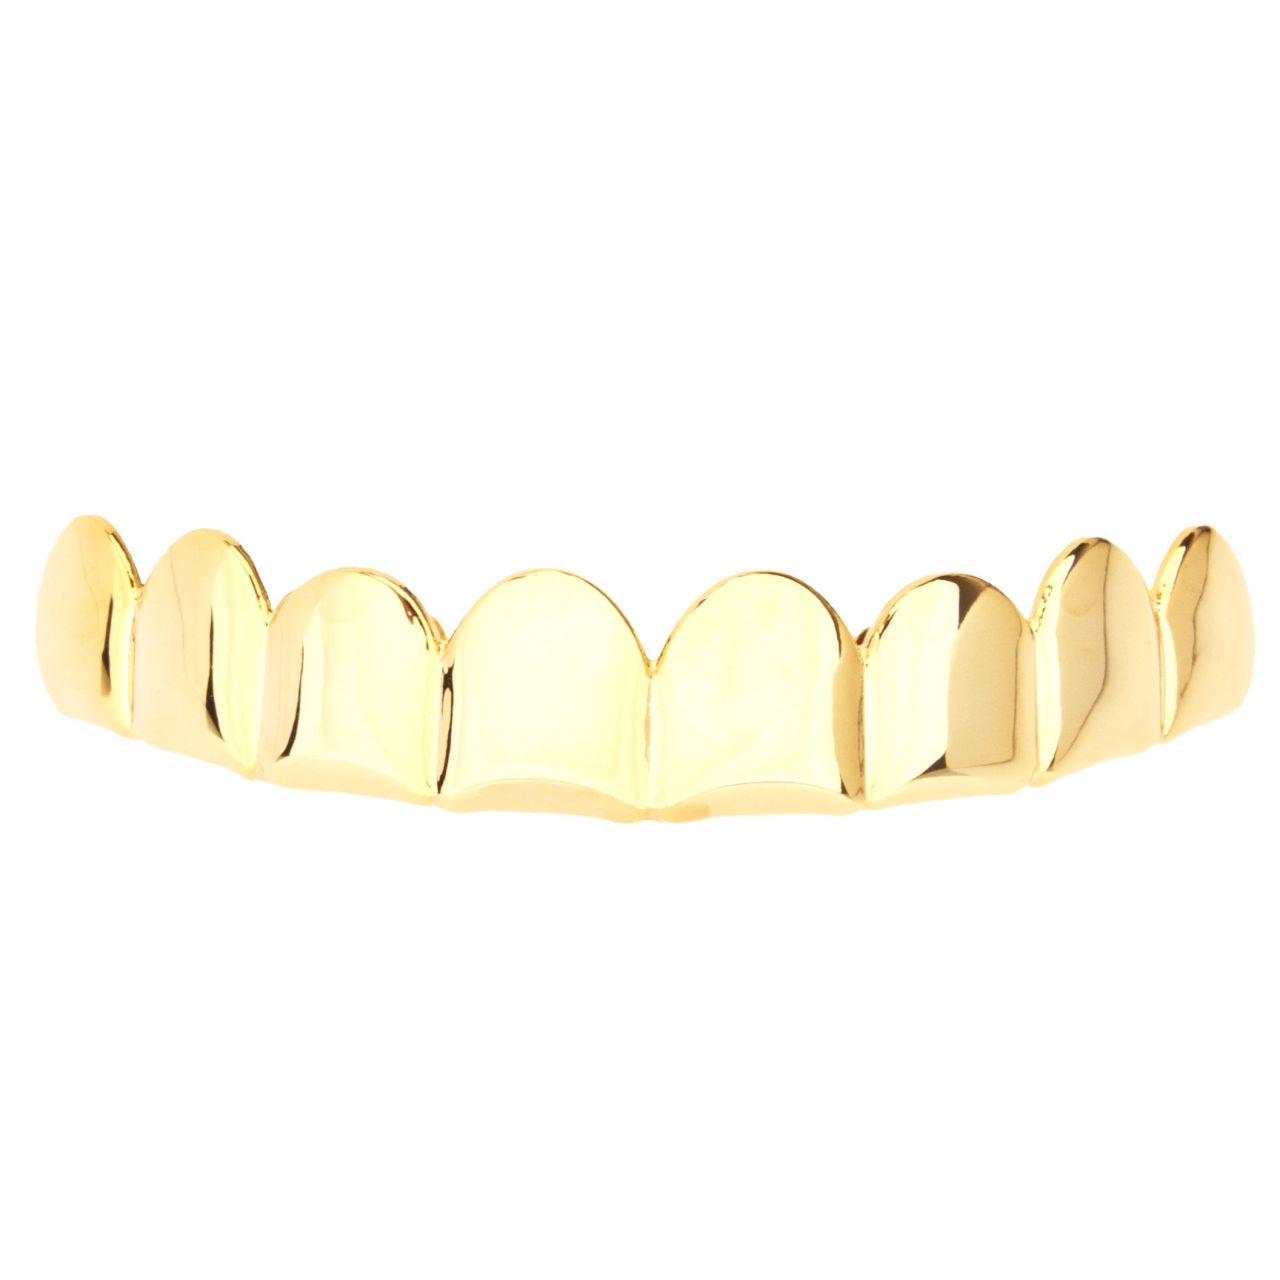 Grillz – Gold – One size fits all – TOP TEETH 8